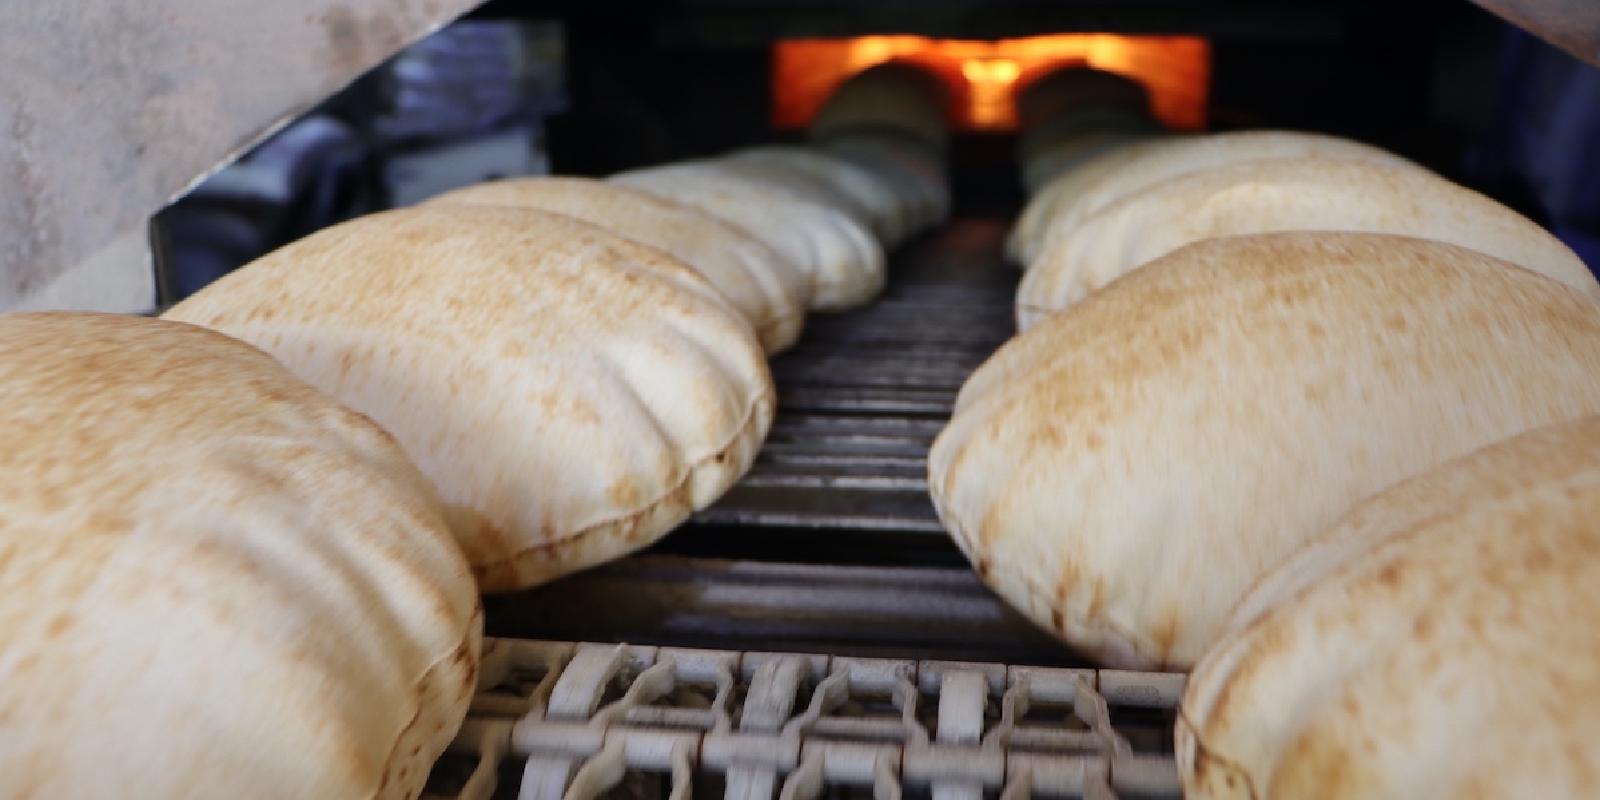 Baked bread comes out of the oven on a conveyor belt for cooling and packing